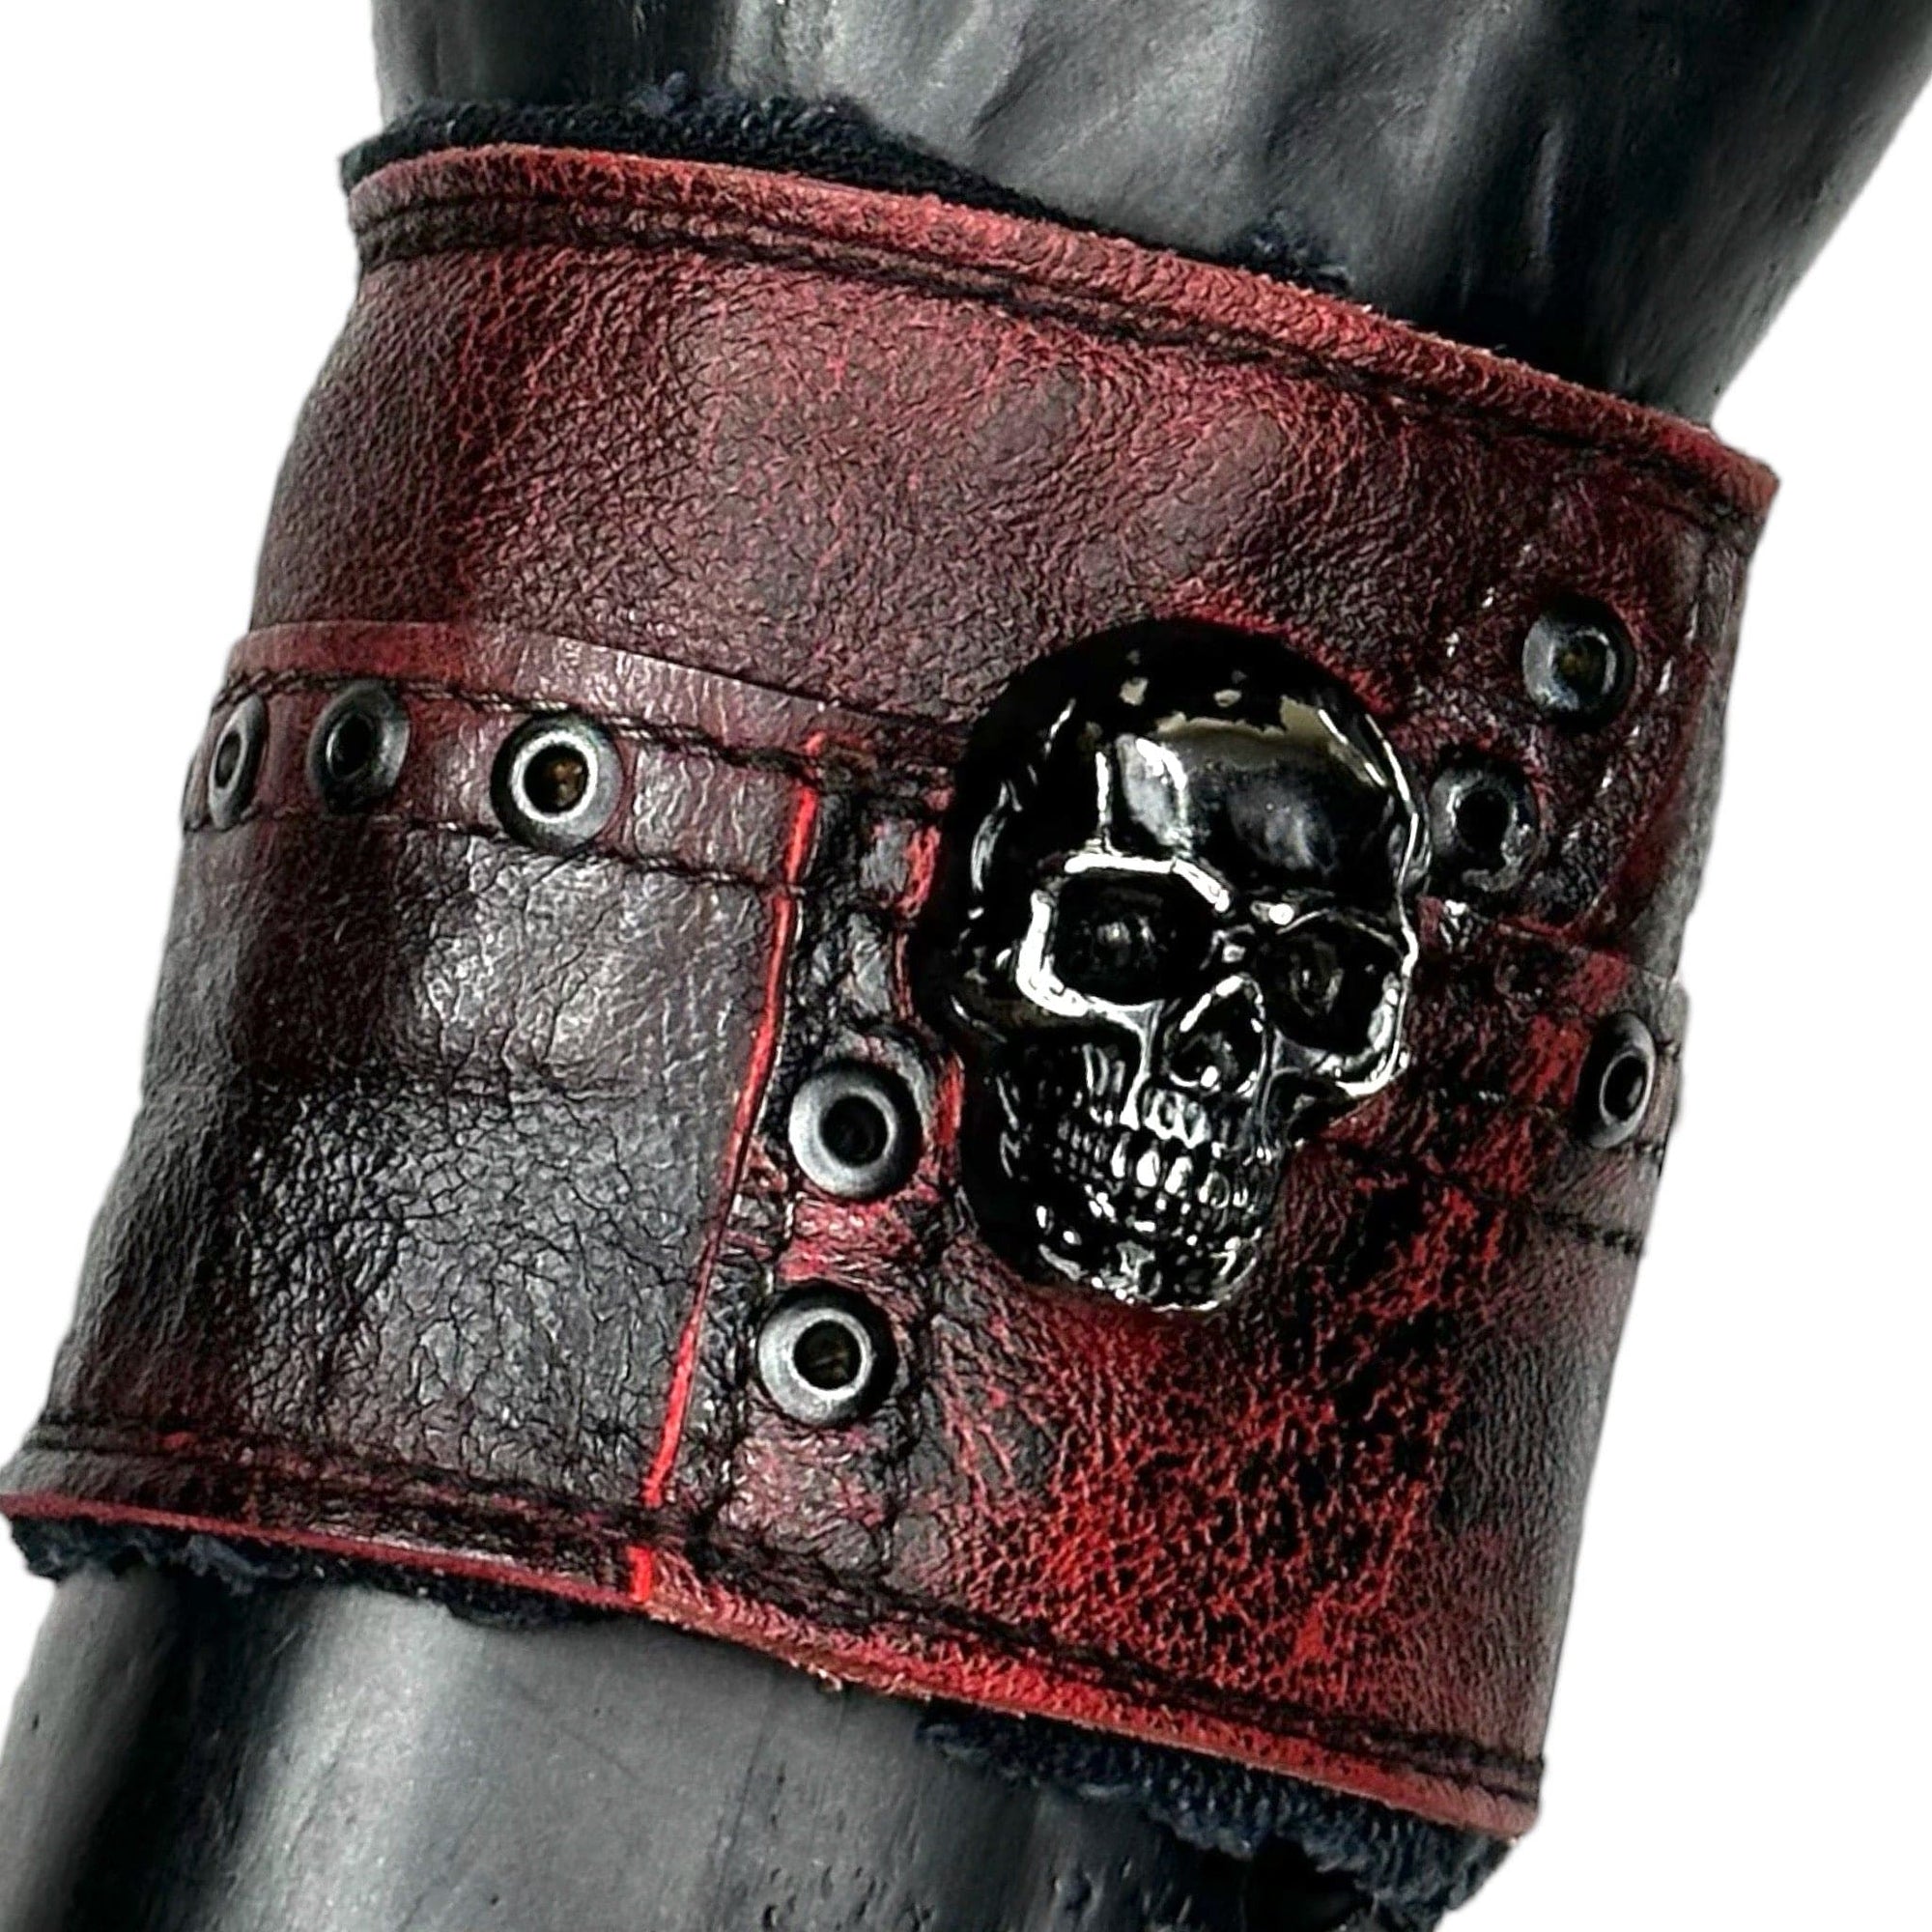 • Wornstar Custom Salvaged Collection• Ready to ship - Custom leather wrist band• One of a kind• Designed, made, and sold exclusively by Wornstar Clothing• Completely hand-made• Individually made; each one will vary slightly• Made with soft leather• Lined for comfort• Hand-made detail with metal, skull accent•